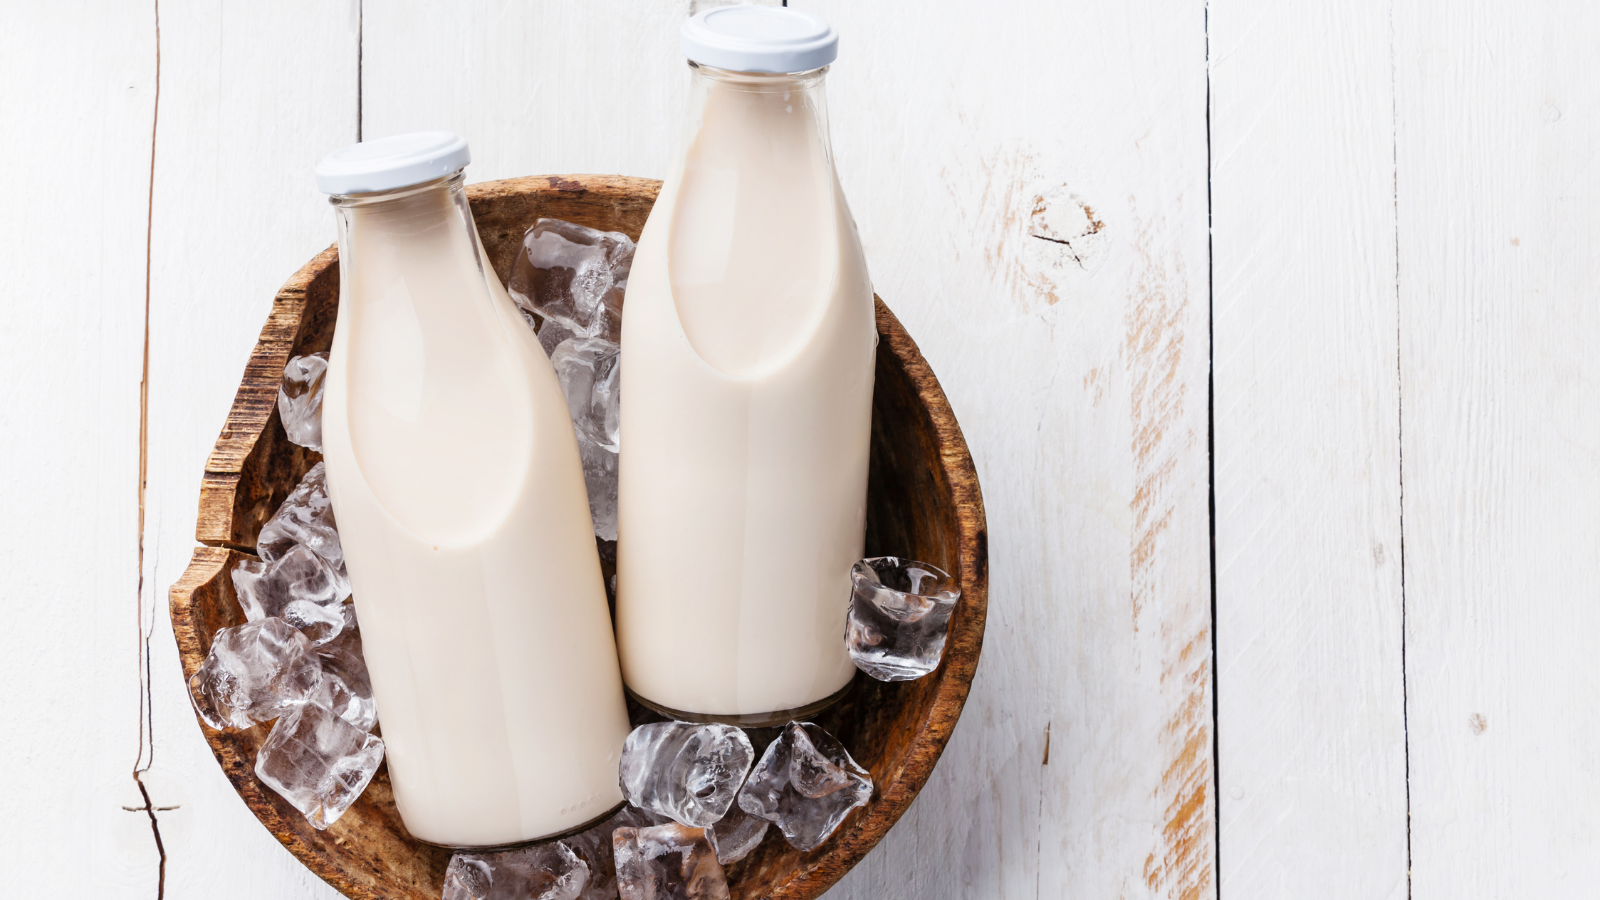 Two Bottles Of Milk In A Wooden Bowl